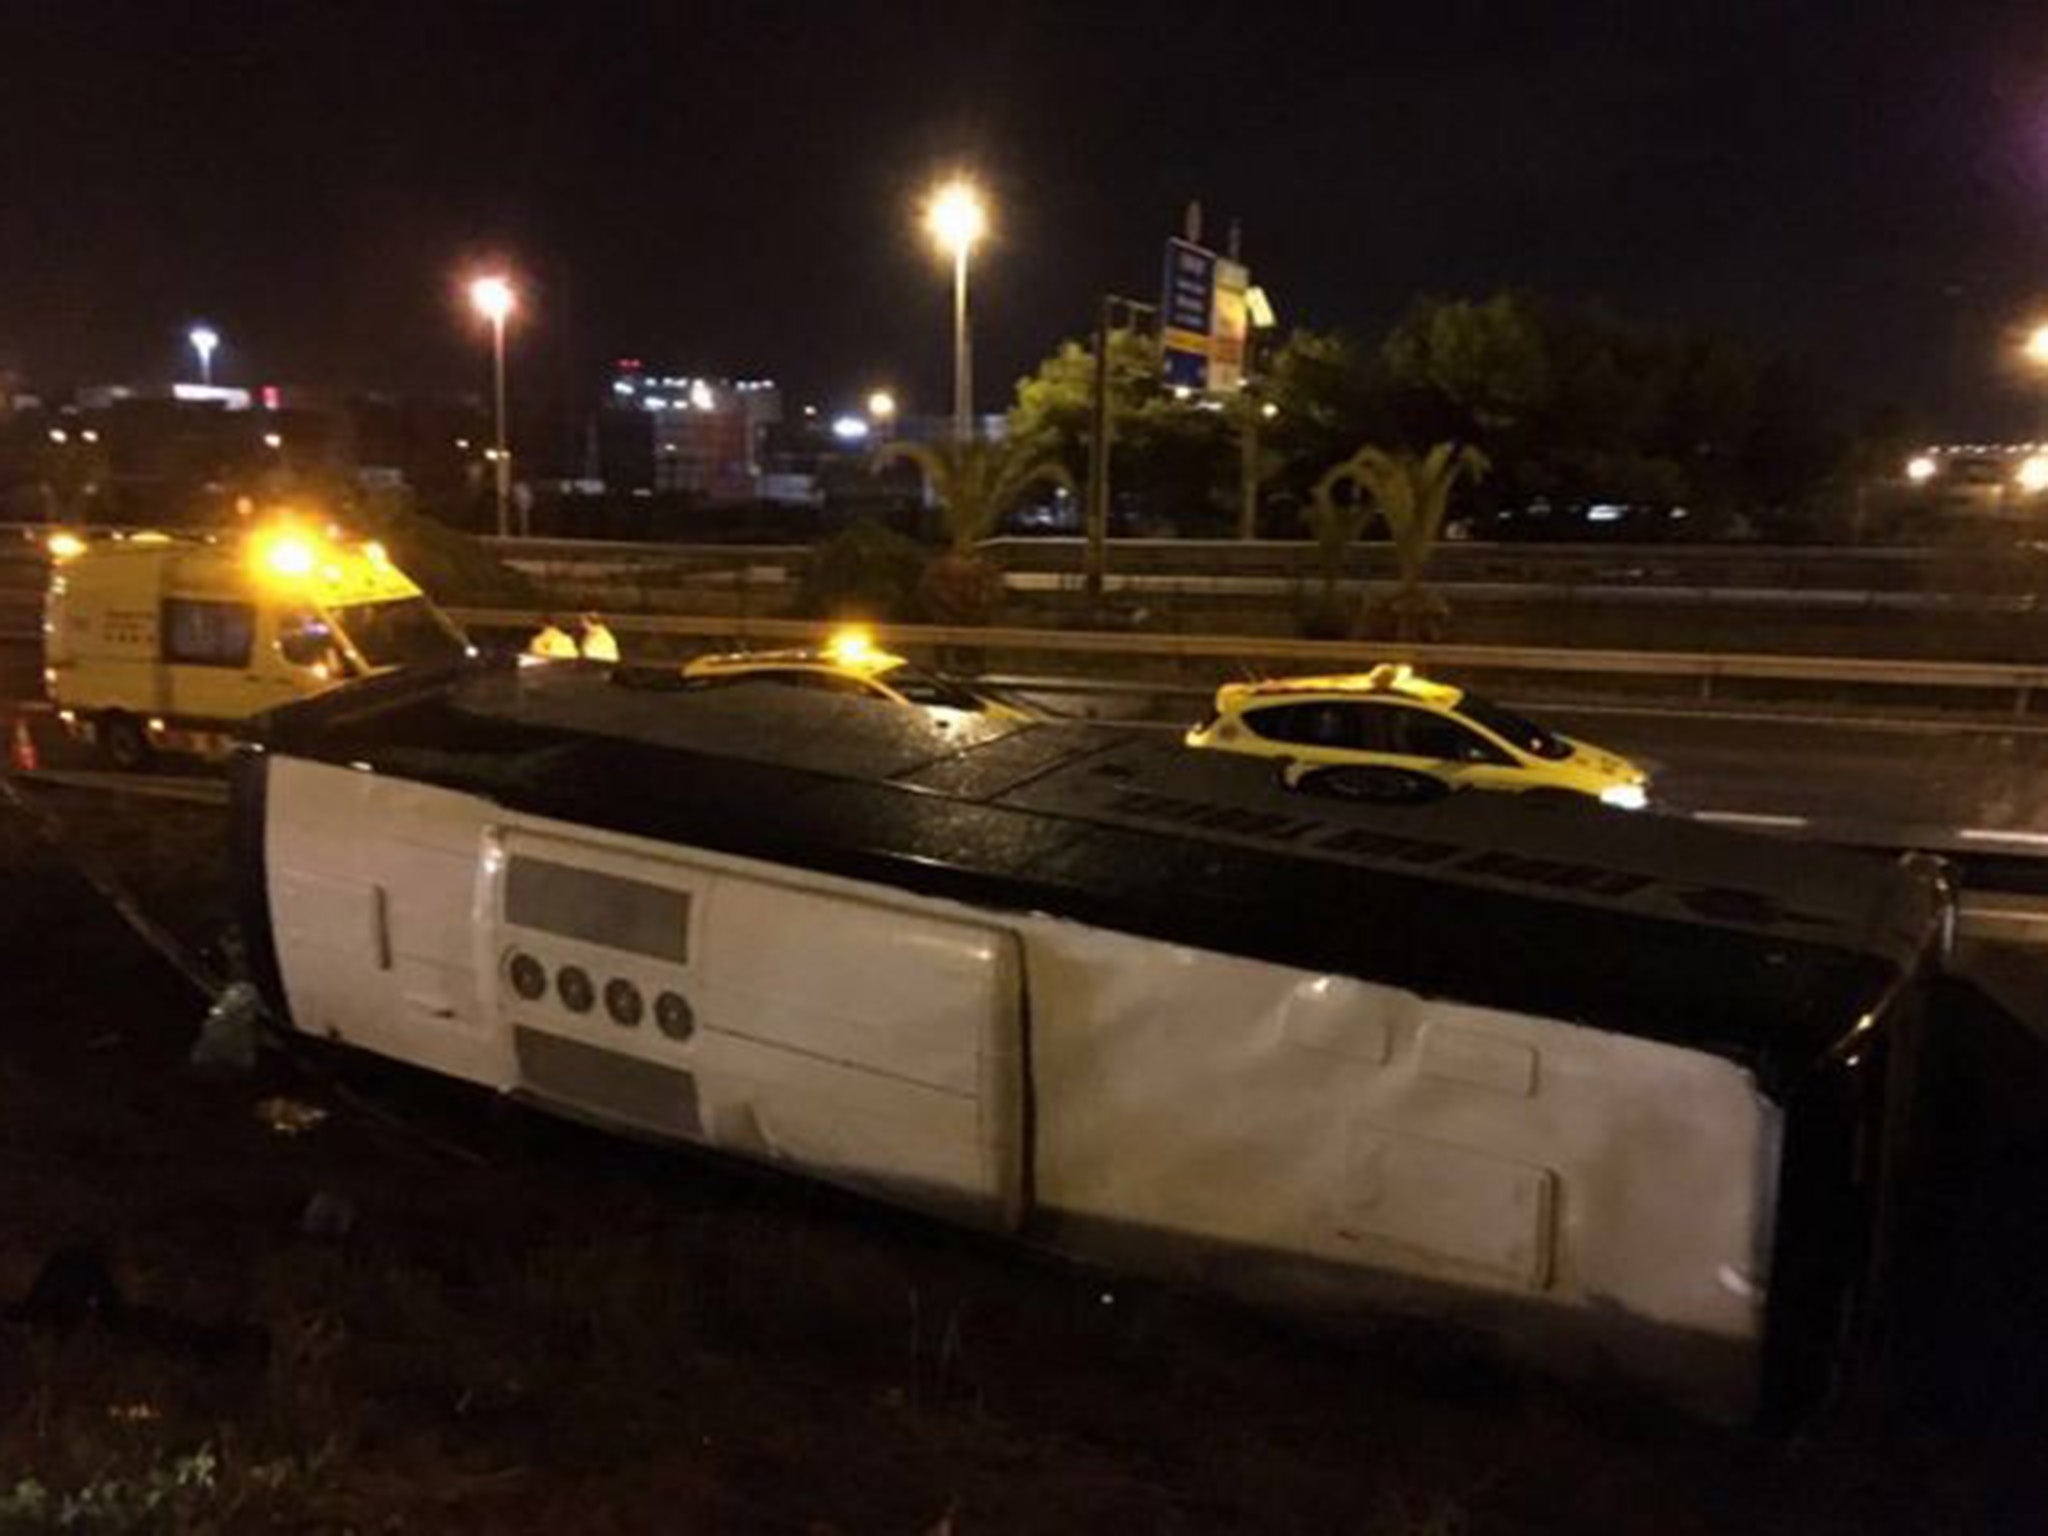 A photo of the overturned bus in Barcelona where 24 people were injured